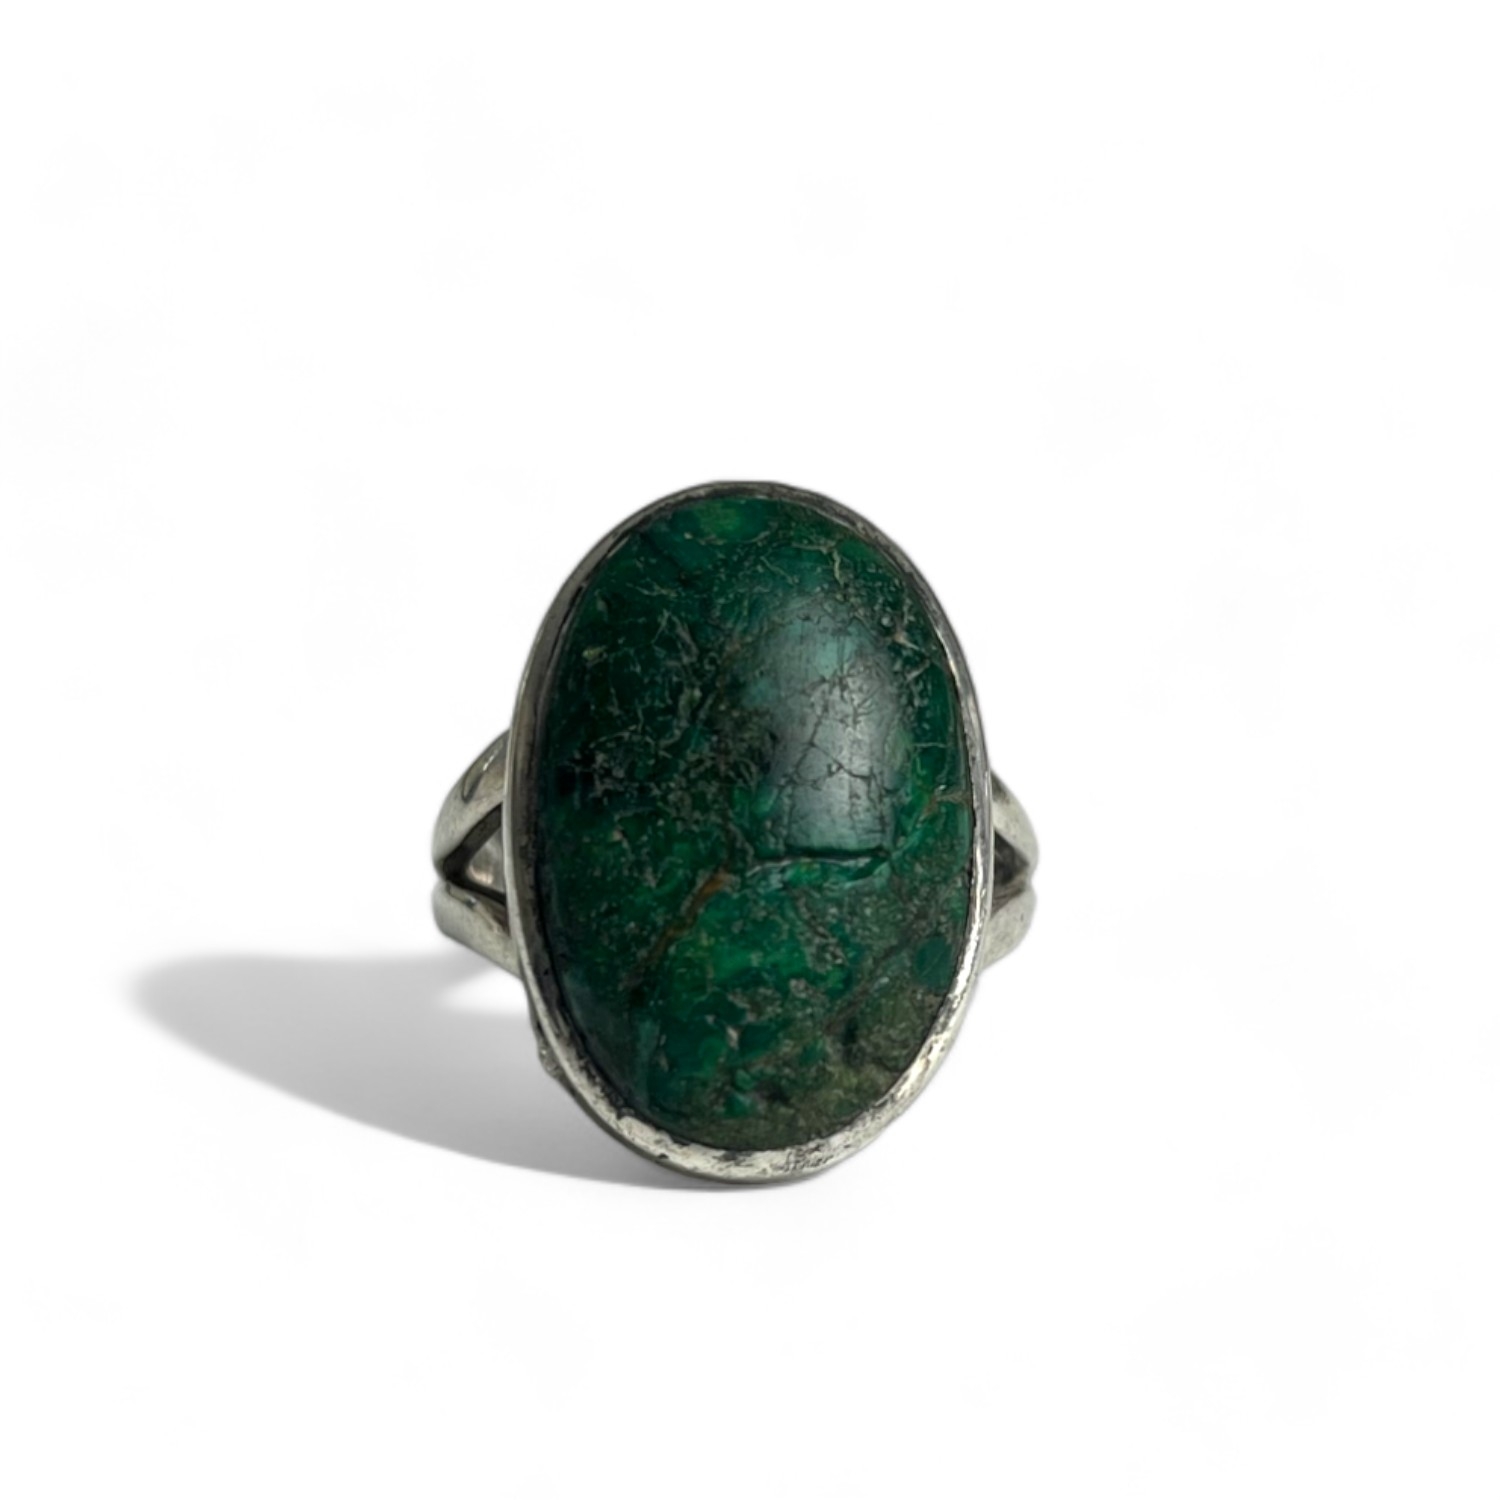 A sterling silver & unpolished cabochon stone ring. Possibly Maw sit sit?  - Image 2 of 3